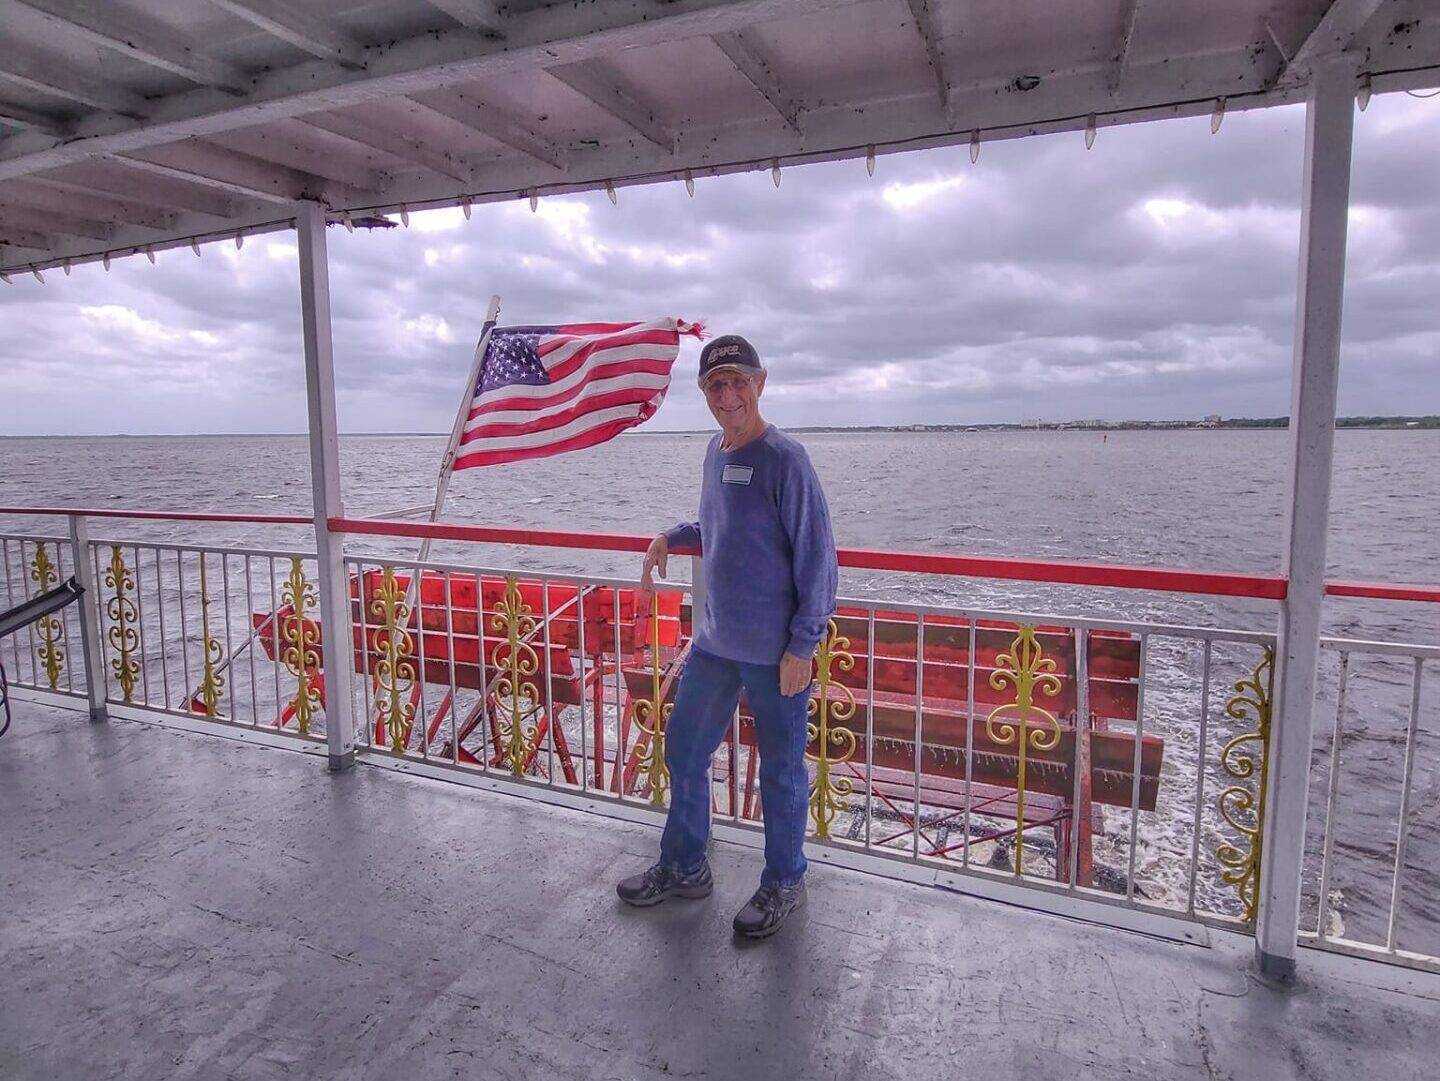 LIFE member standing on the deck of the Sanford River Boat